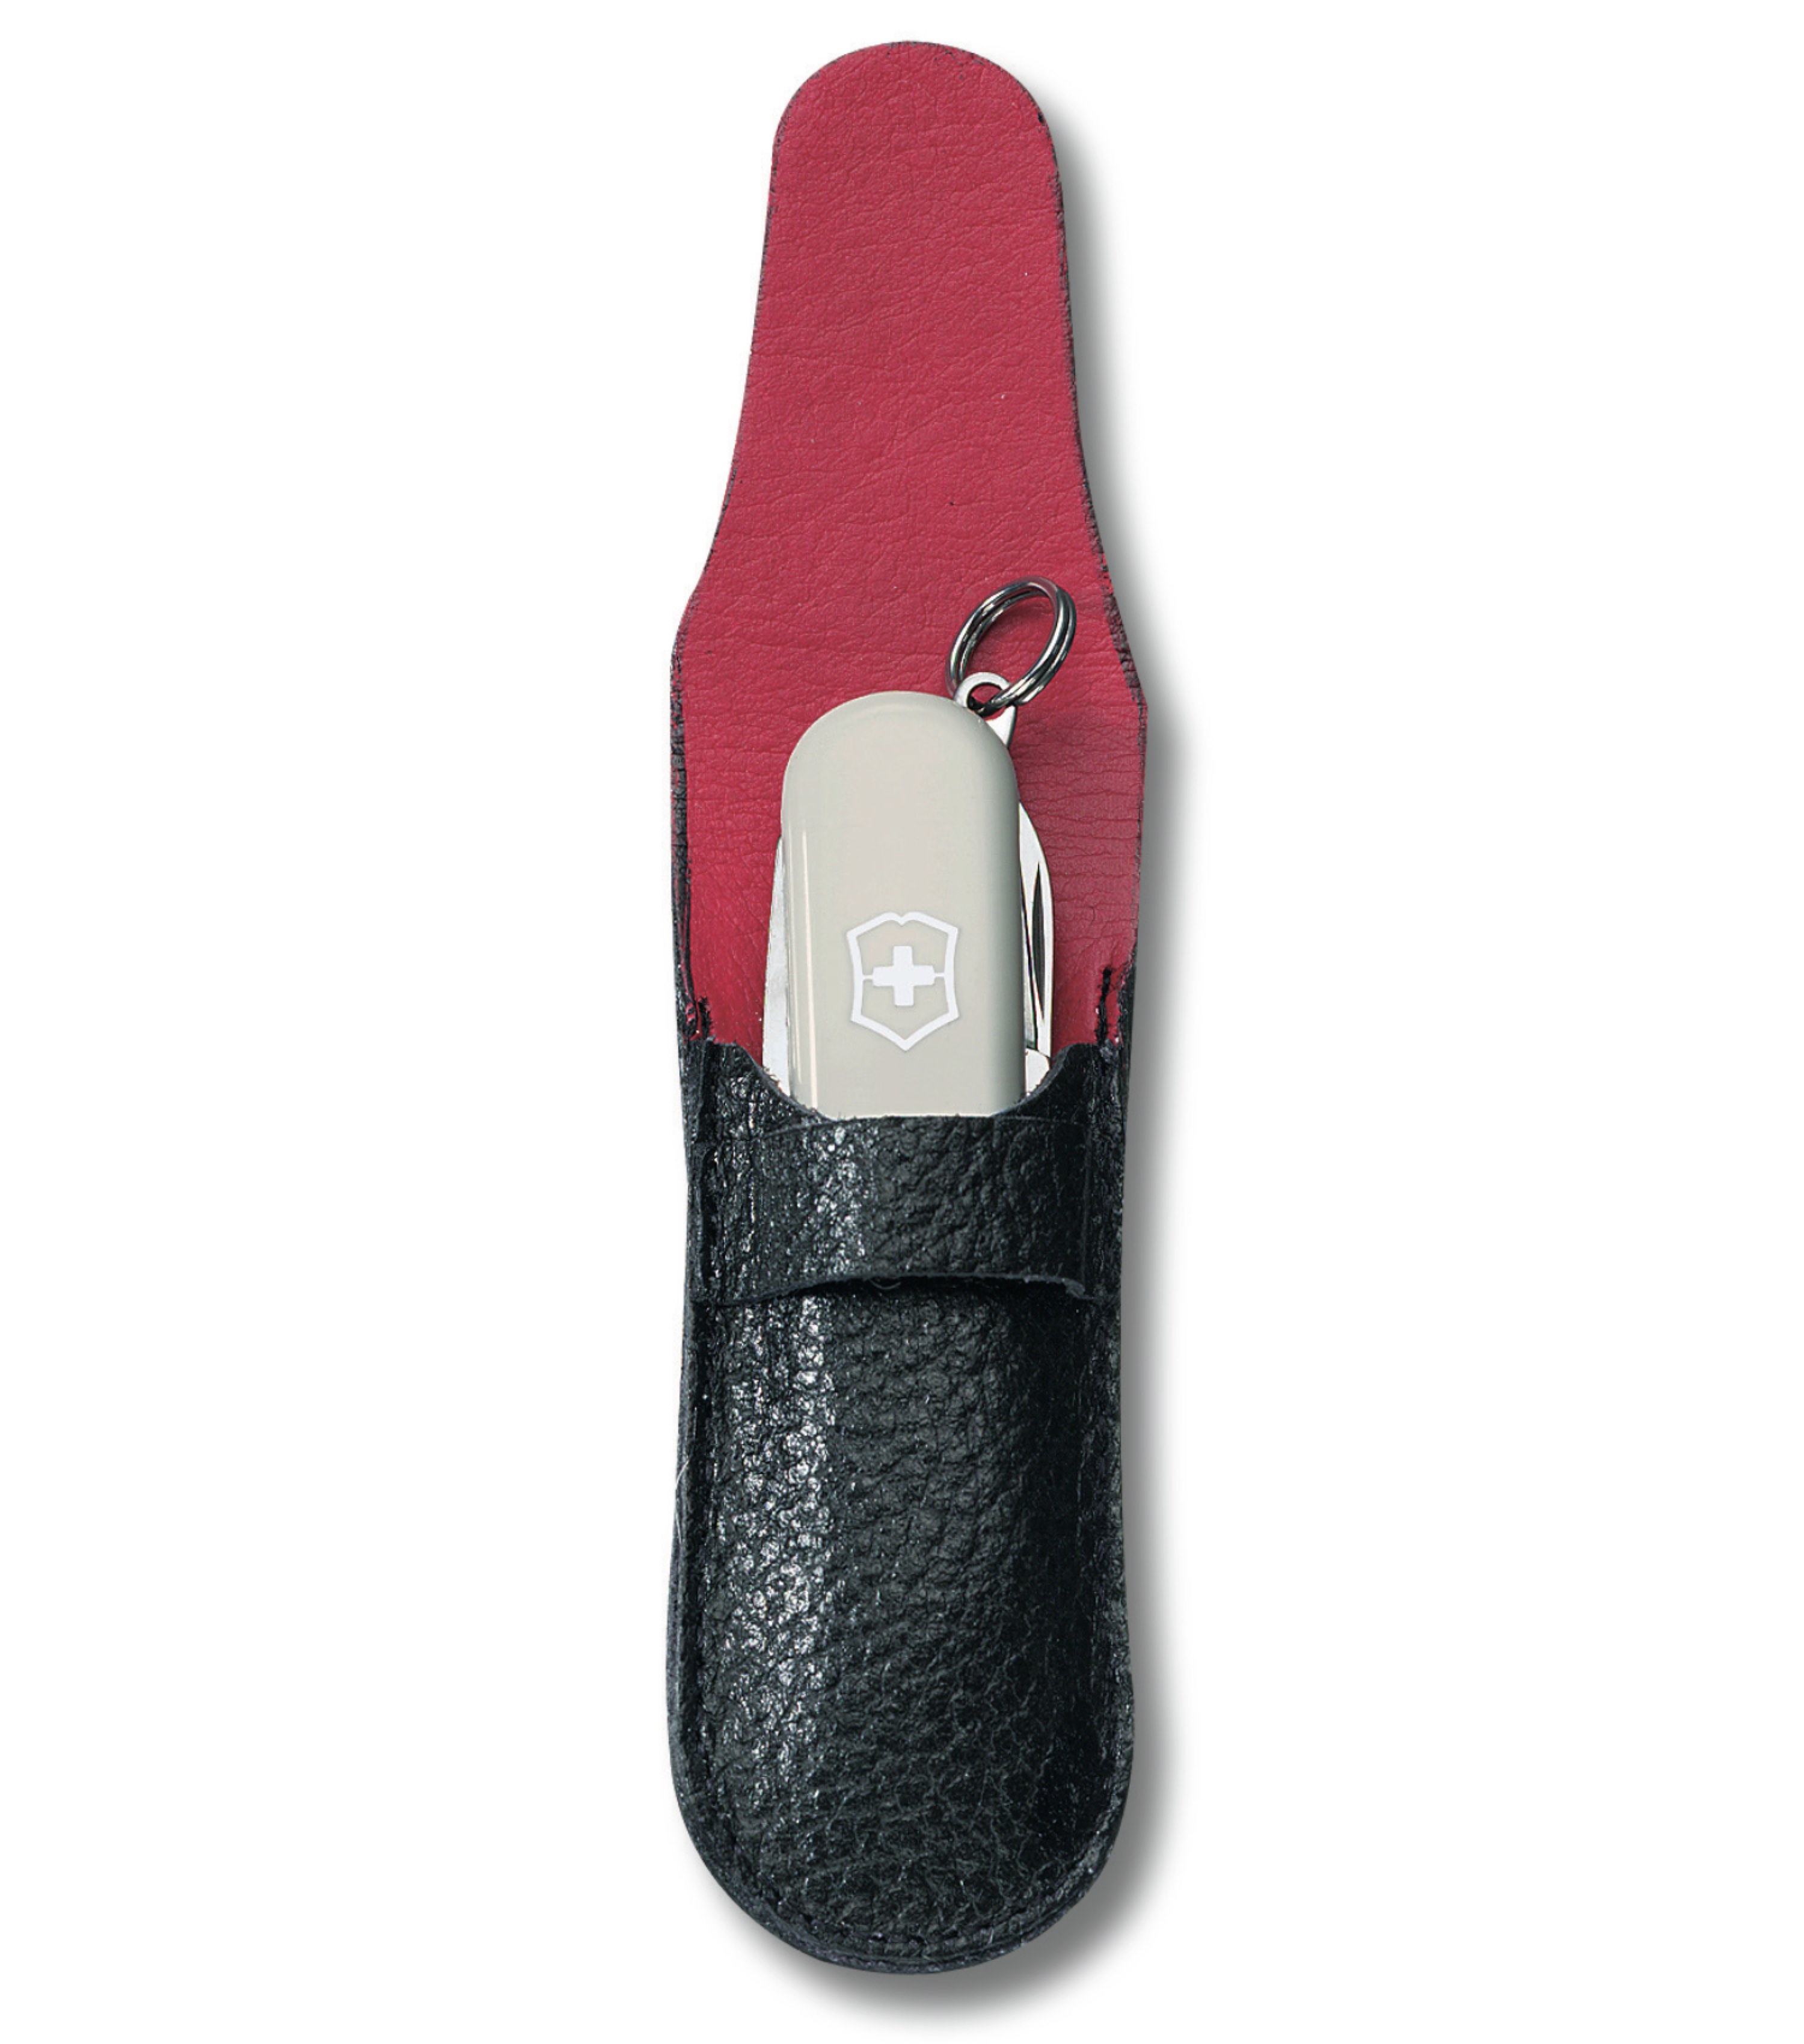 Victorinox Black Leather Case For Classic Swiss Army Knife By Victorinox  (4.0662)